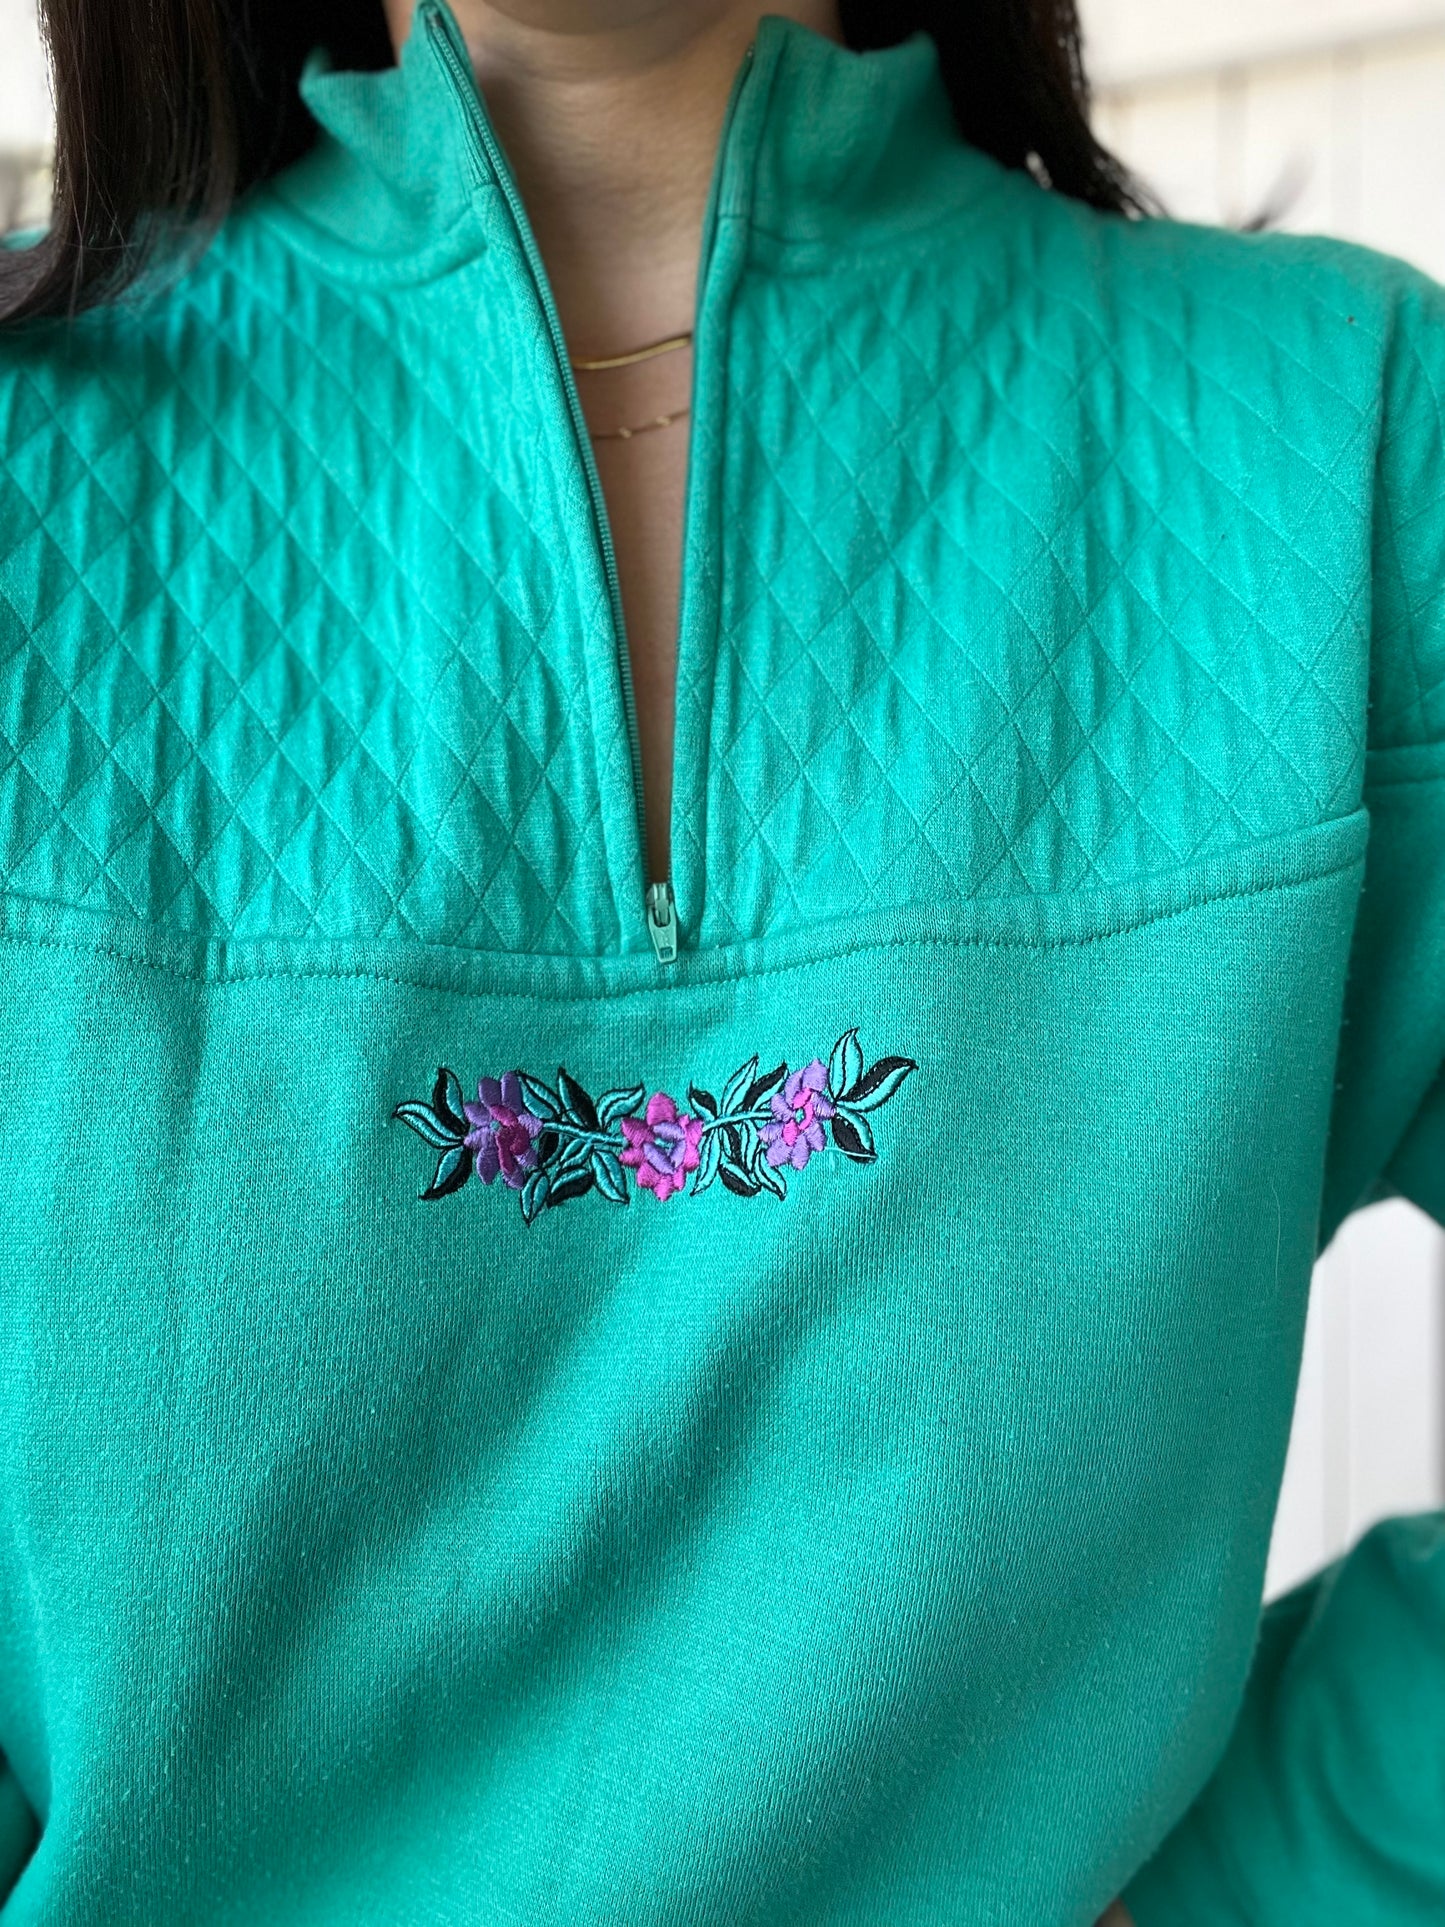 Turquoise Quilted Sweater - Size L